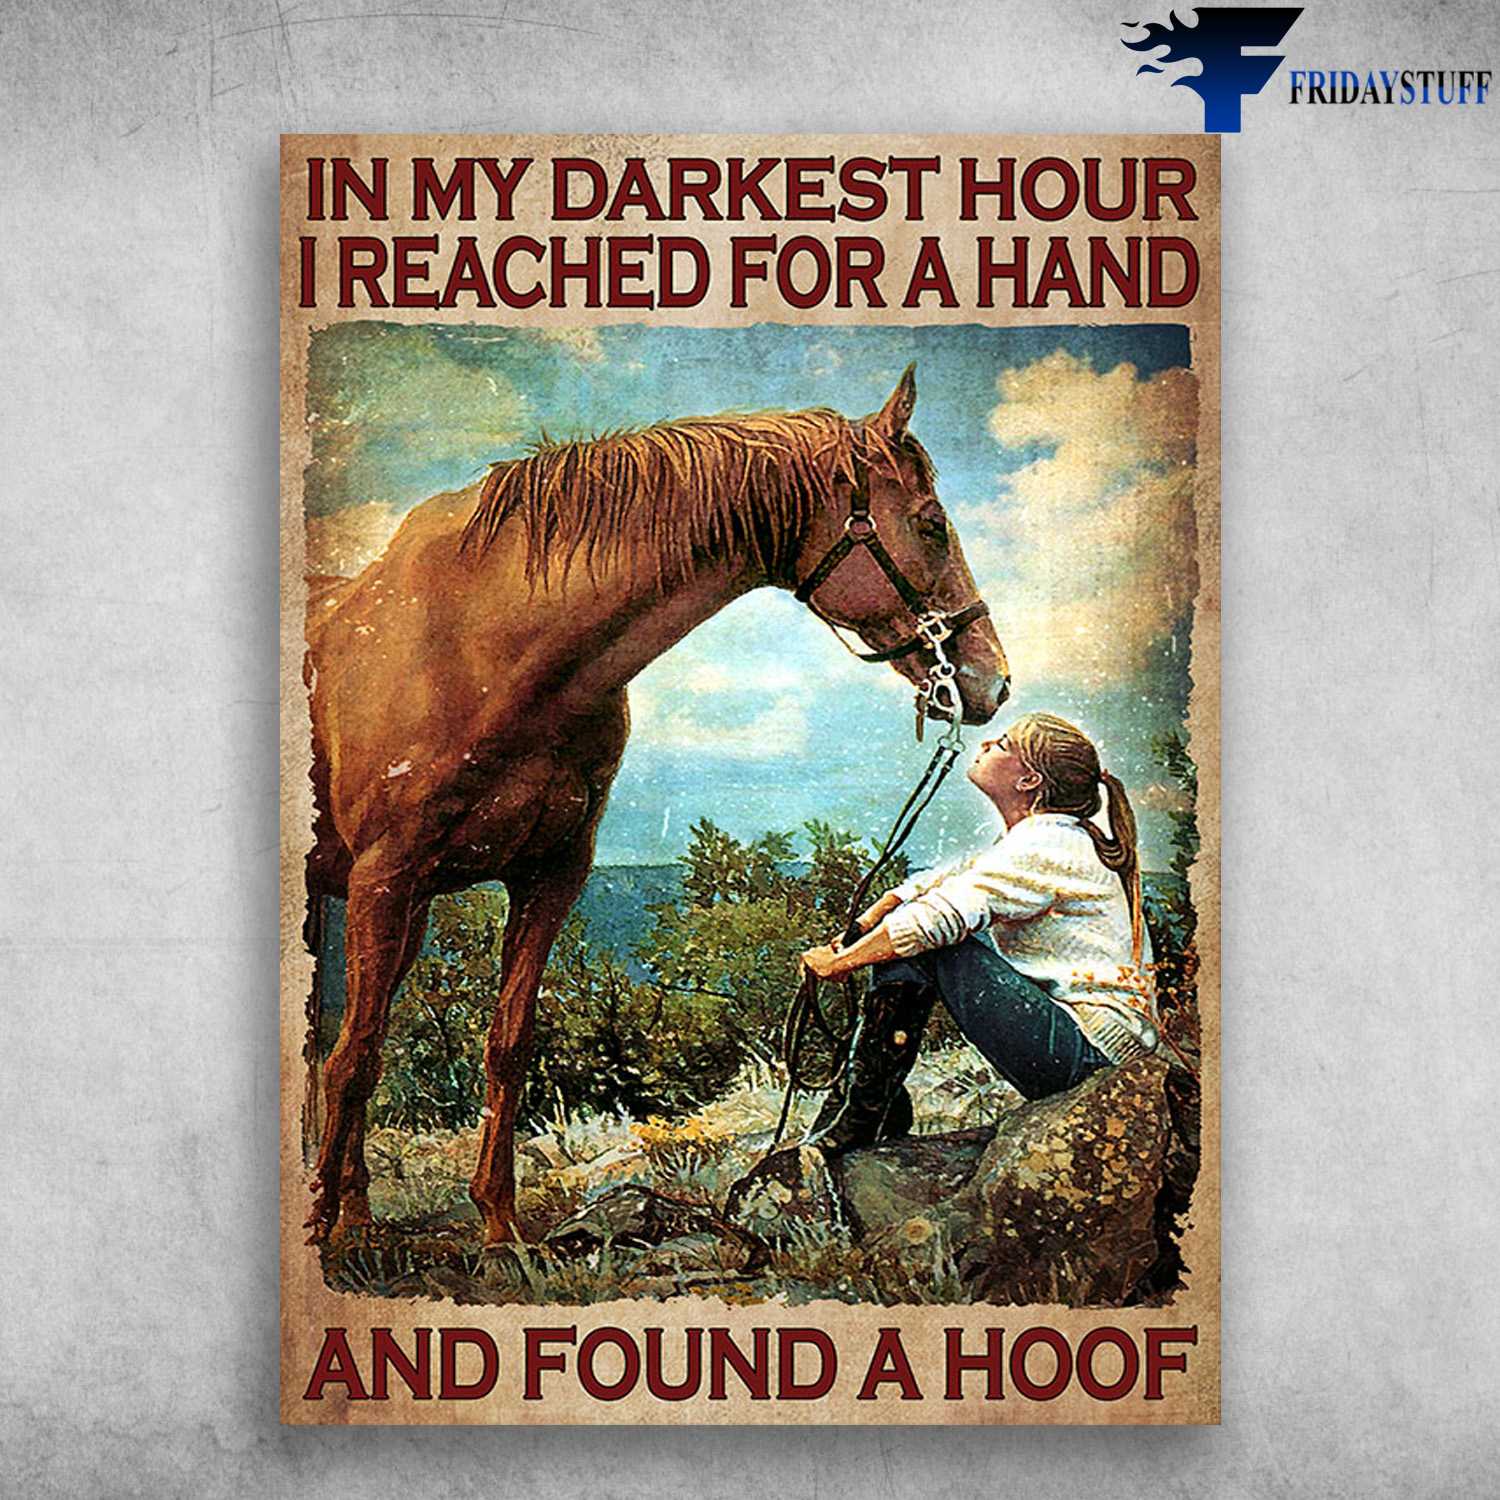 Girl Loves Horse - In My Darkest Hour, I Reached For Hand, And Found A Hoof, Horse Riding